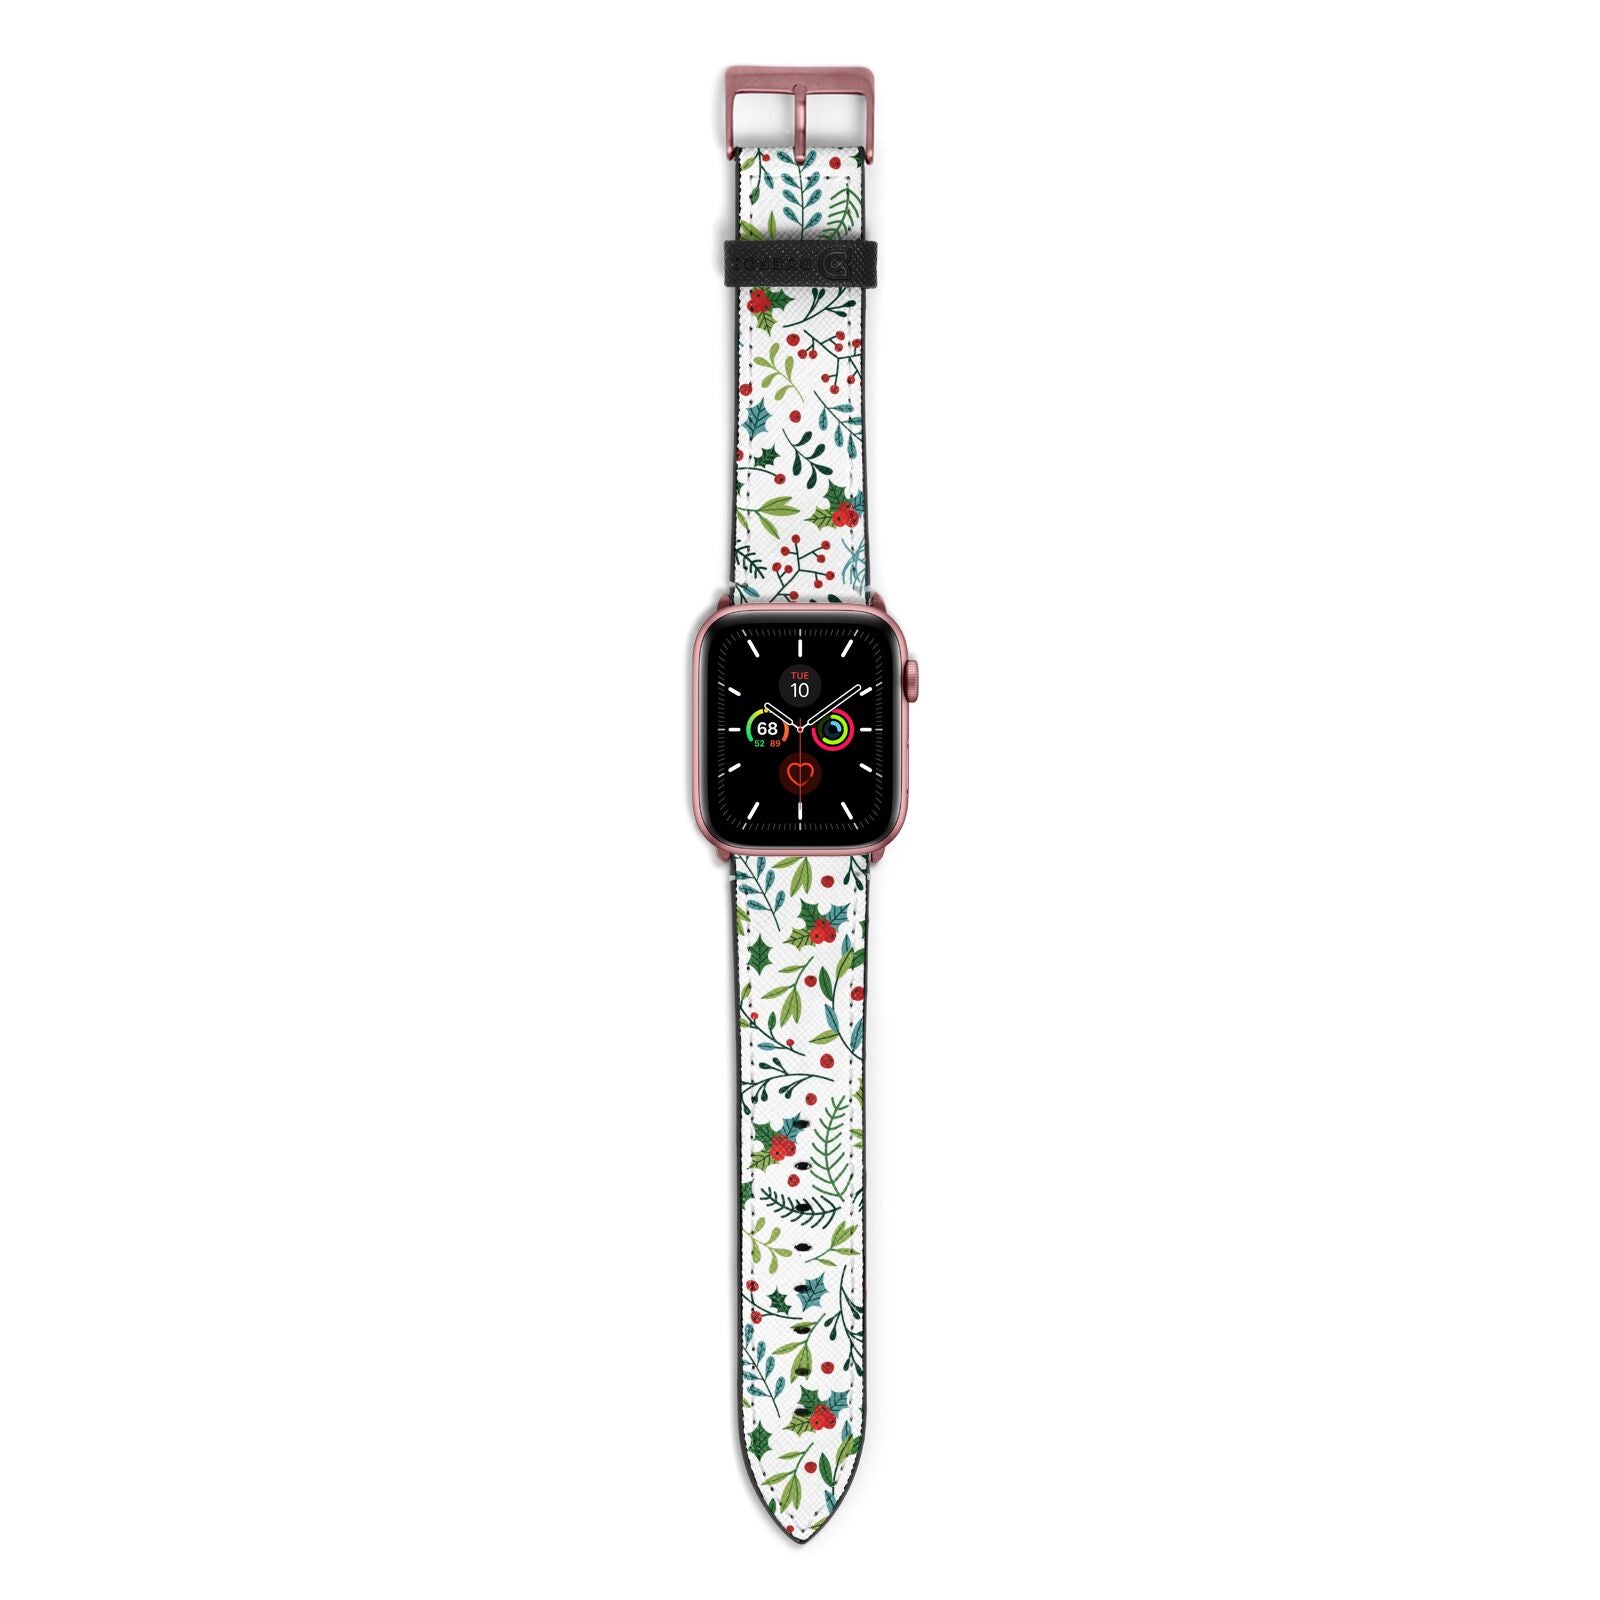 Winter Floral Apple Watch Strap with Rose Gold Hardware